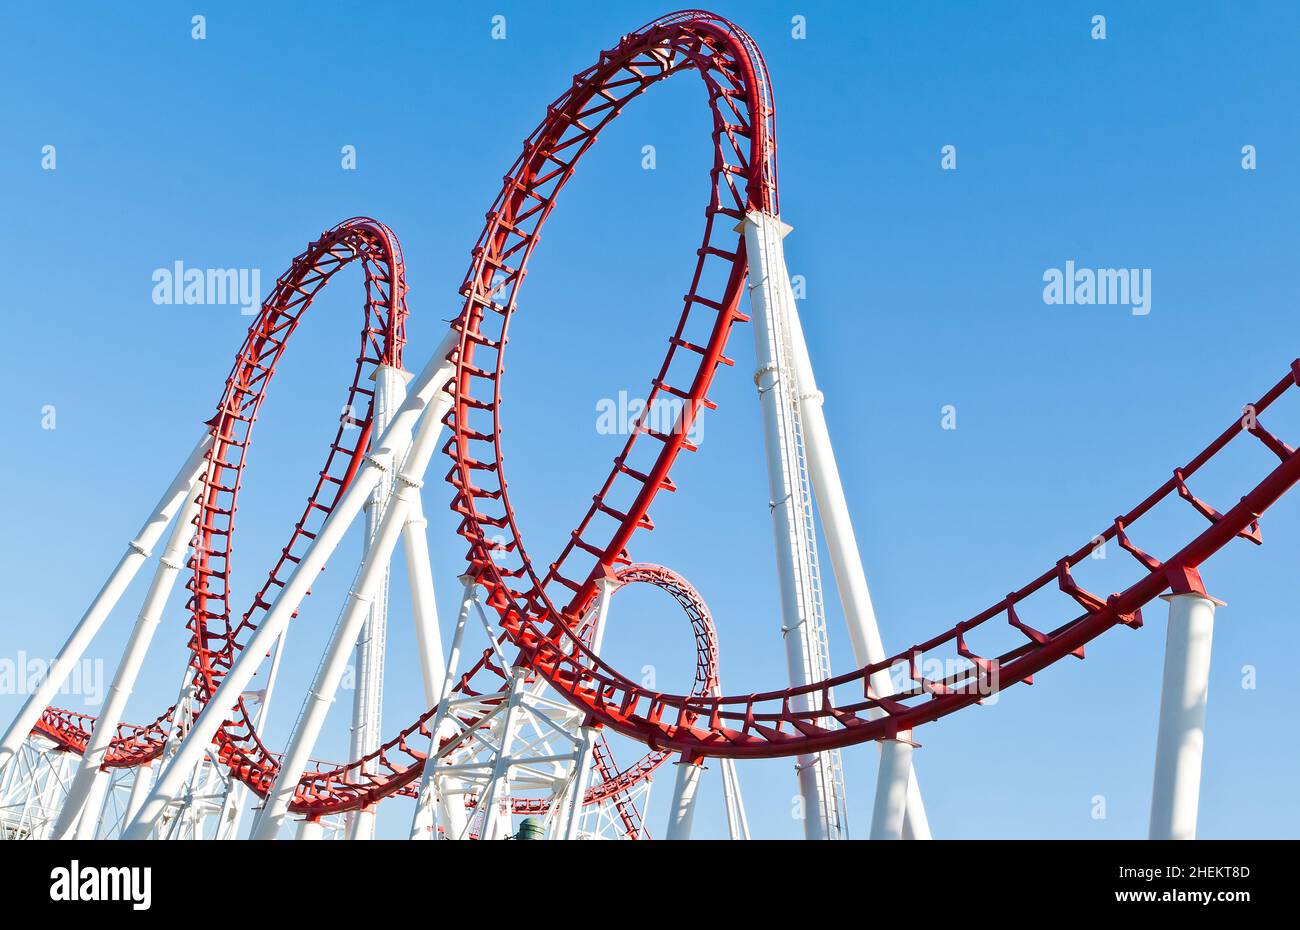 Roller Coaster Loops Stock Photo